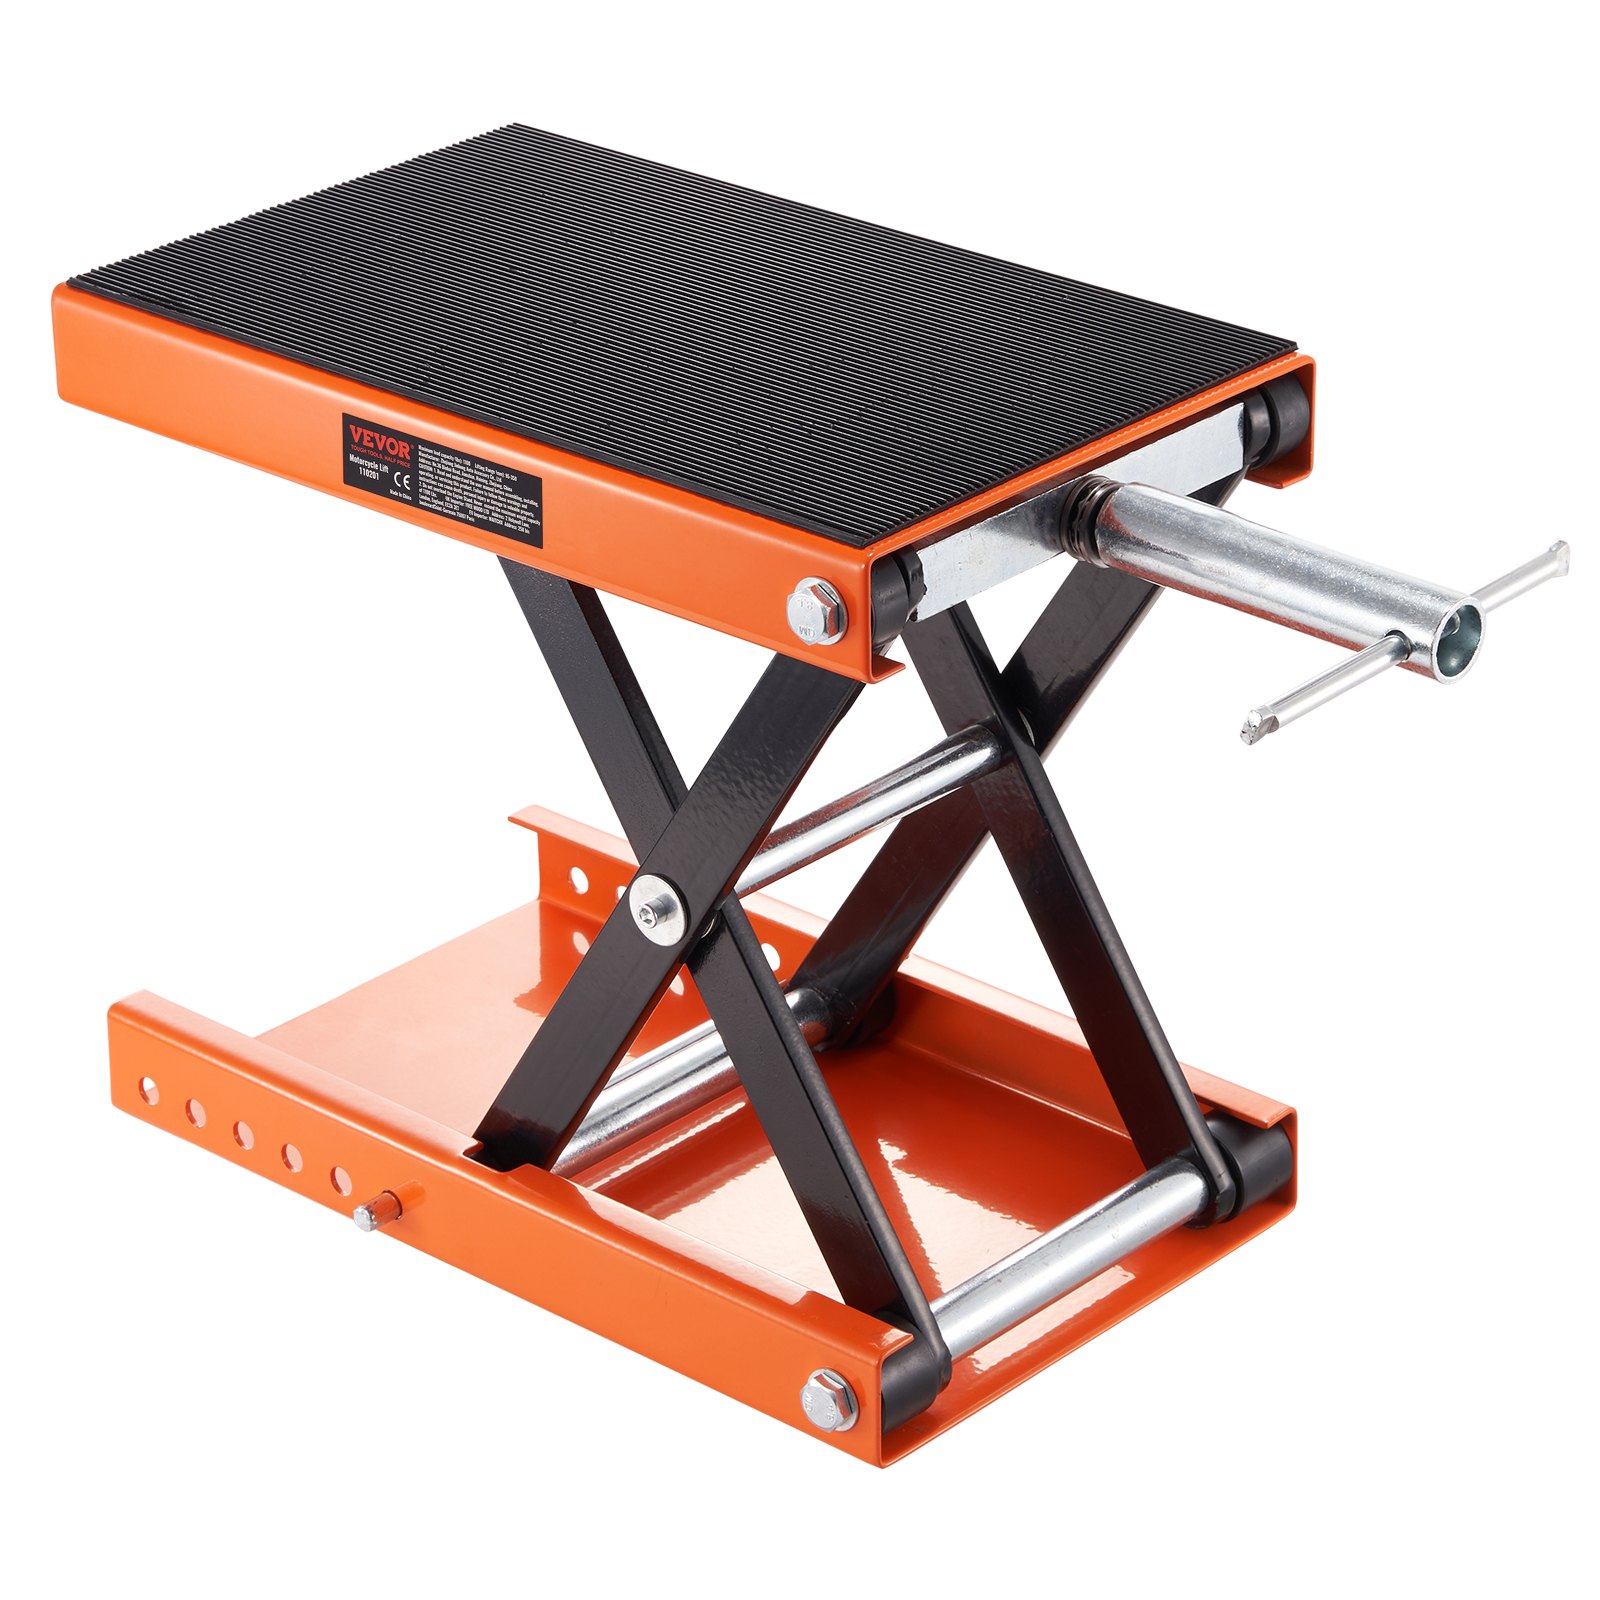 VEVOR Motorcycle Lift, 1100 LBS Motorcycle Scissor Lift Jack with Wide ...